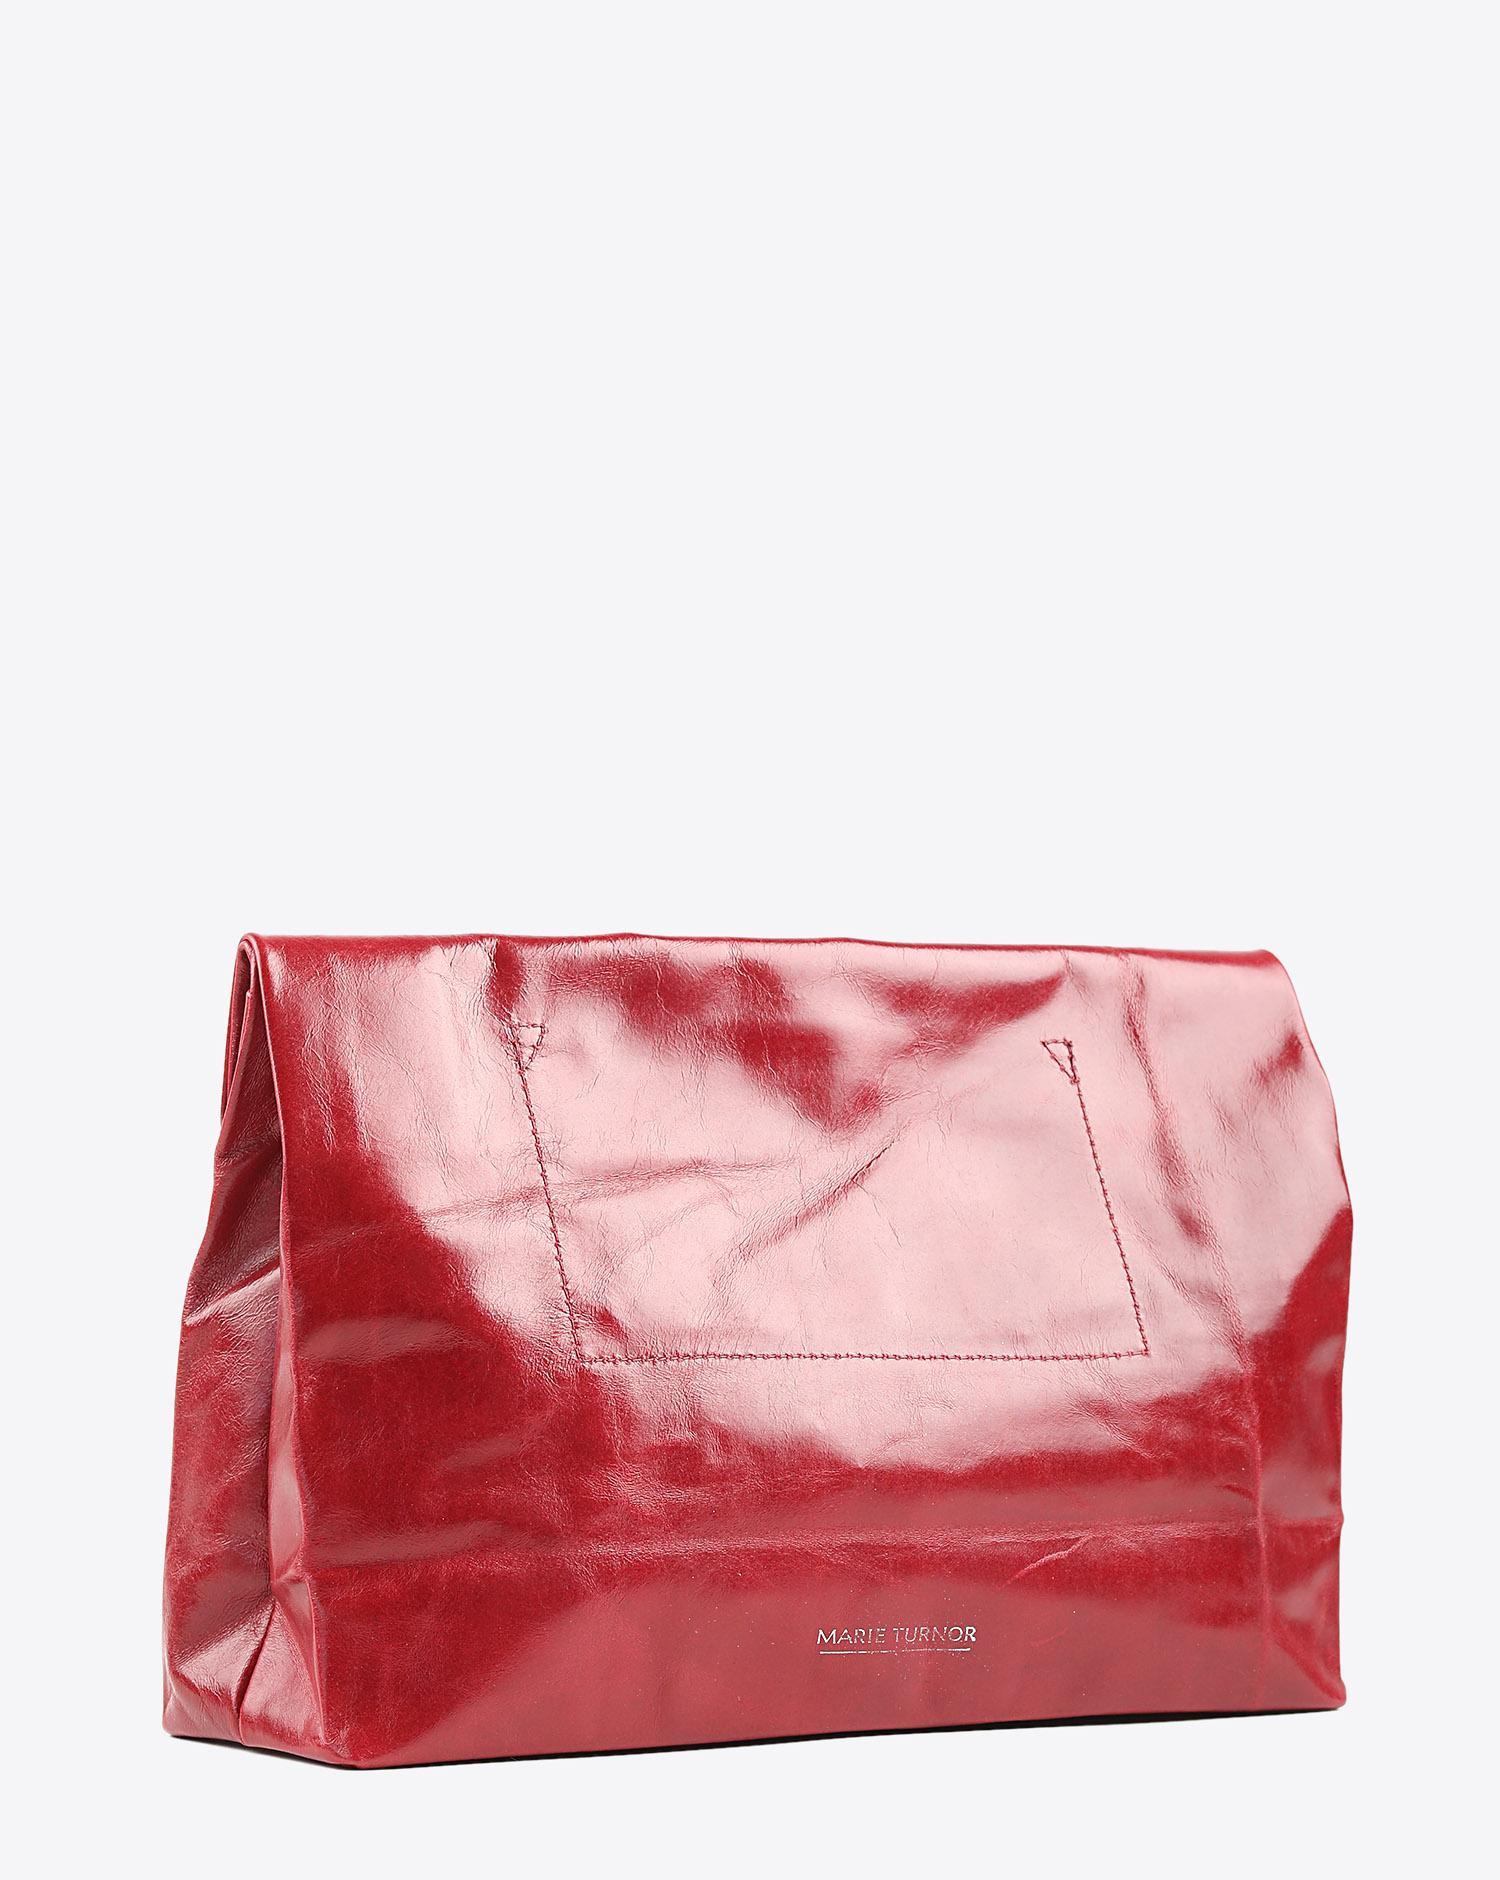 Marie Turnor Lunch Clutch - Red  